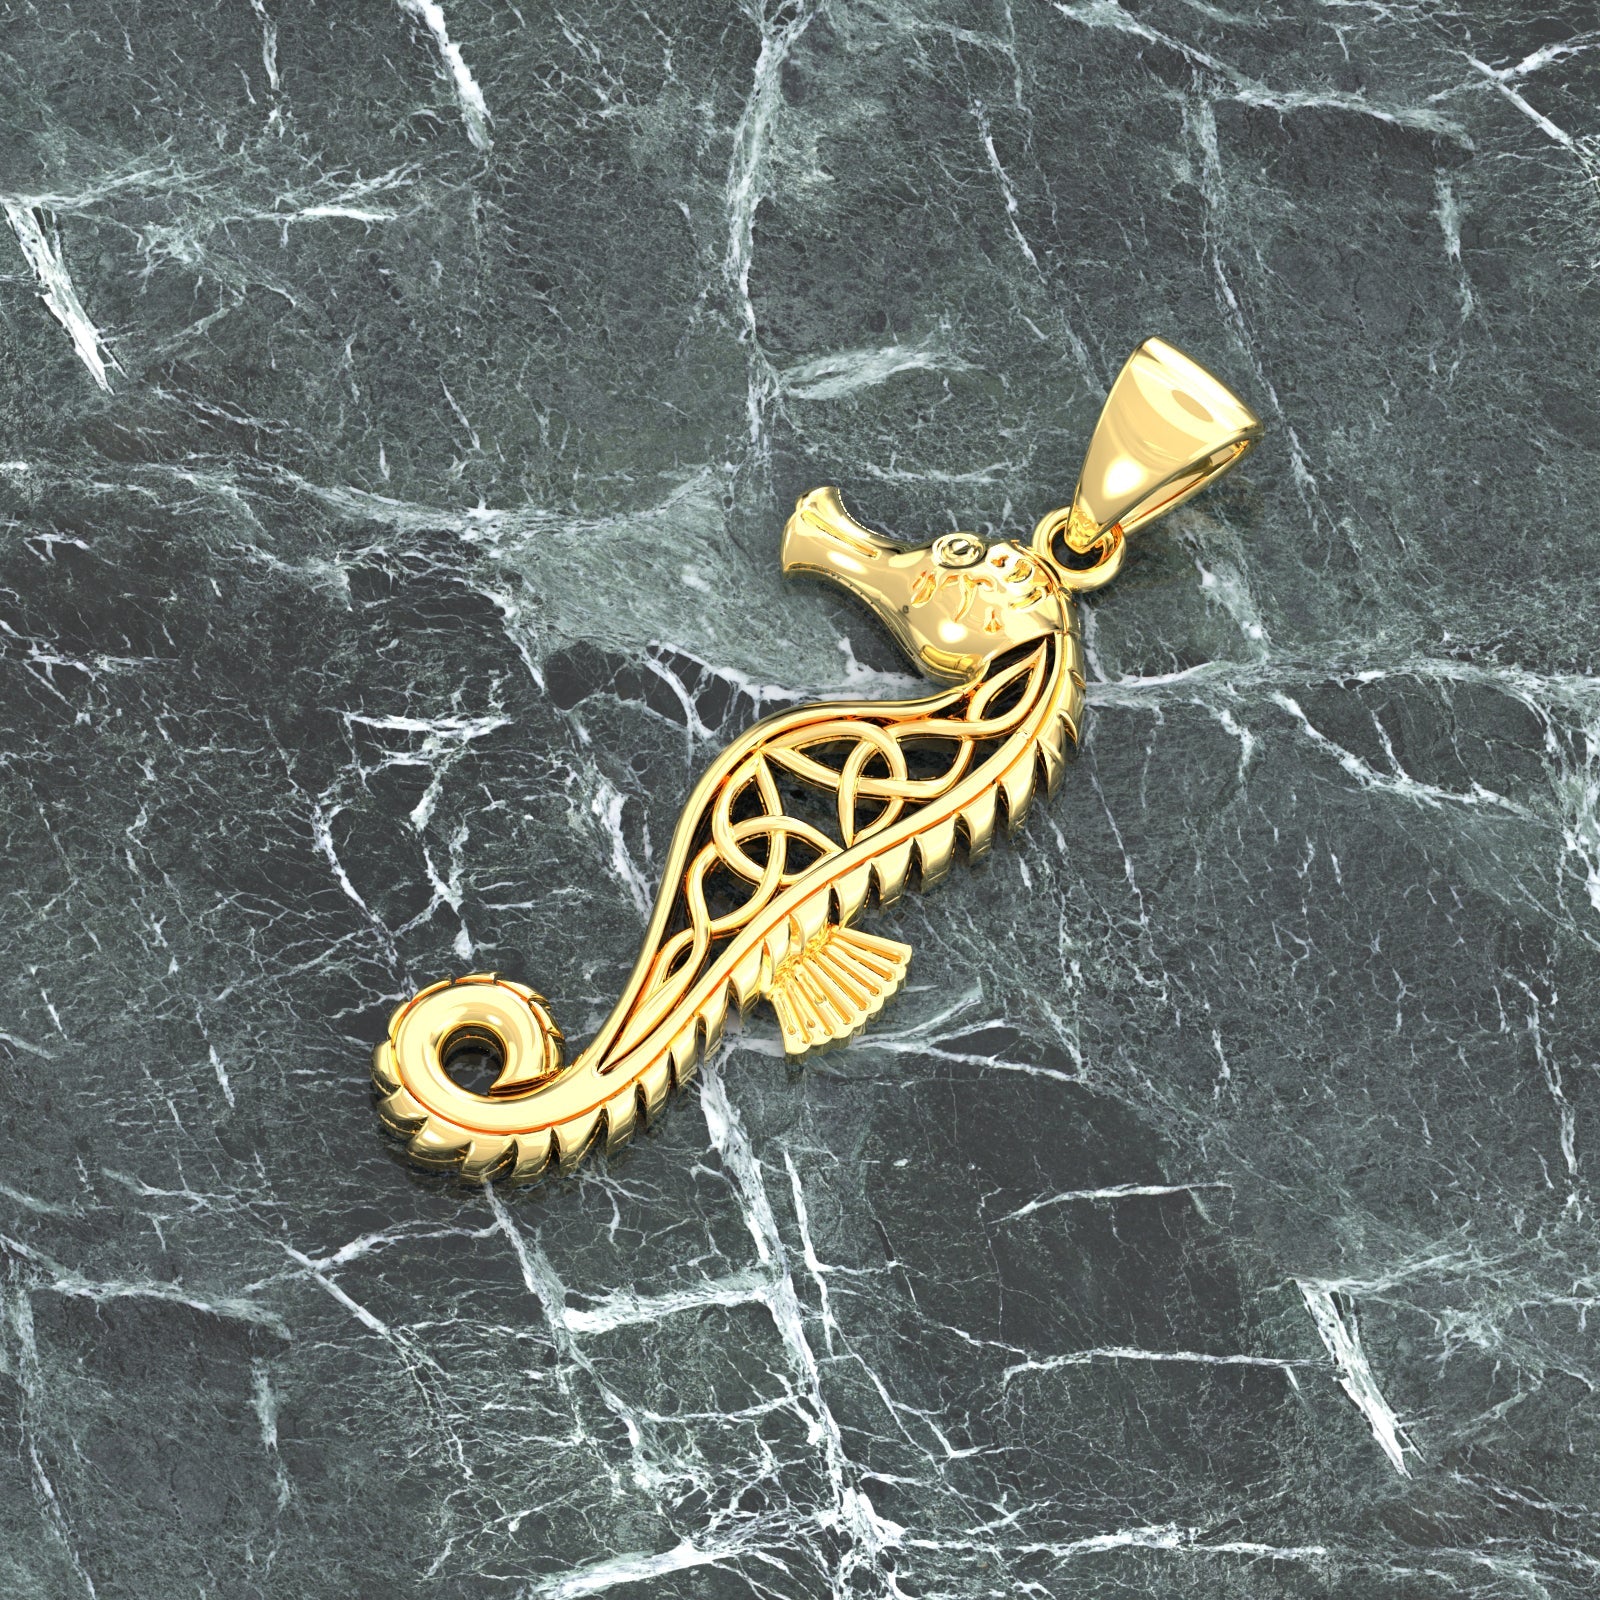 Solid 14k Yellow Gold Celtic Knot Seahorse Aquatic Pendant Necklace, 36mm - US Jewels